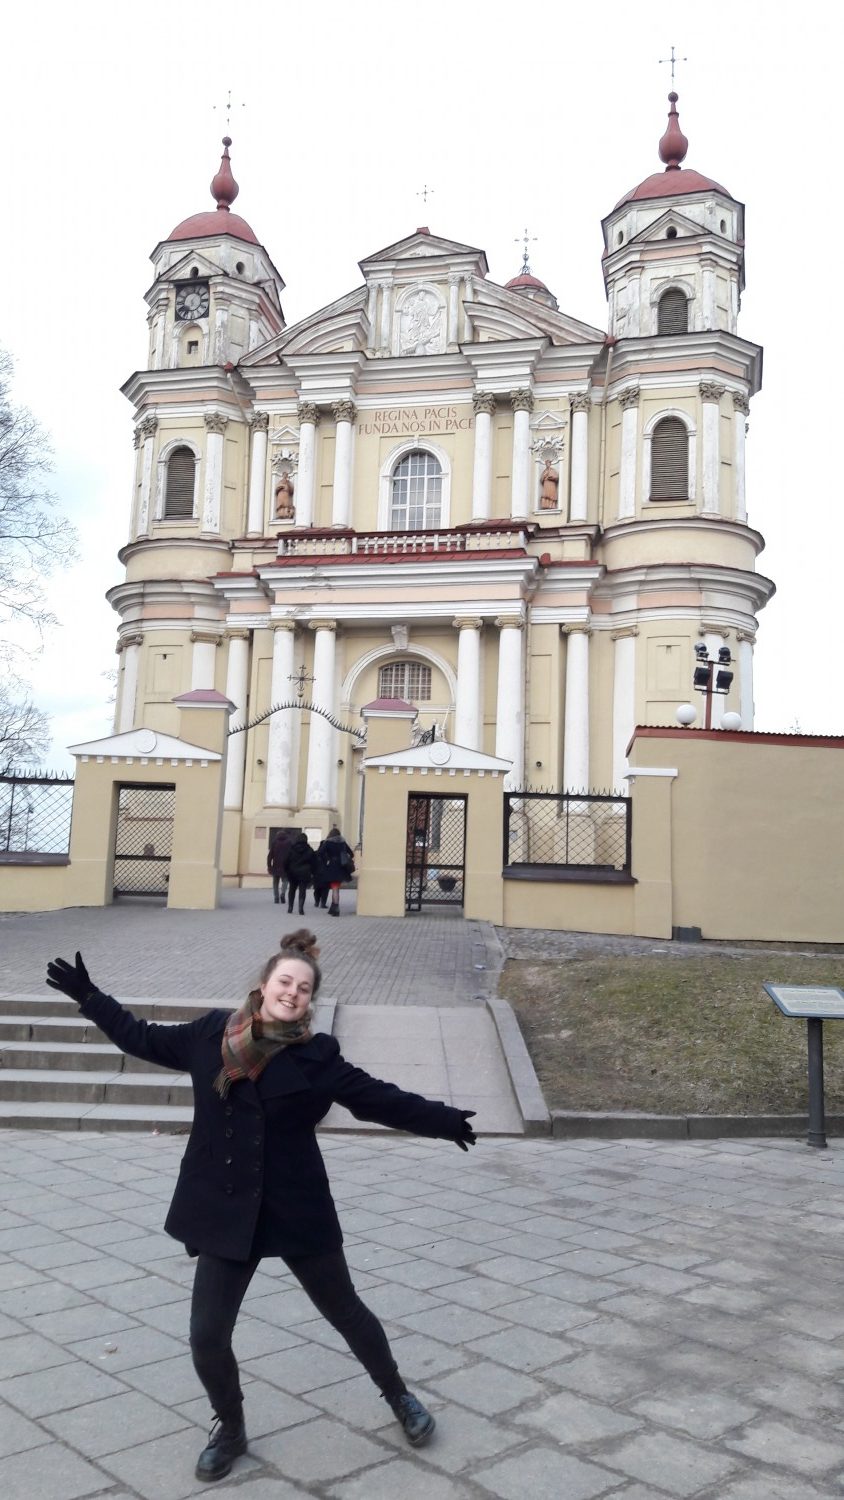 Me in front of the St. Peter and St. Paul's church in Vilnius